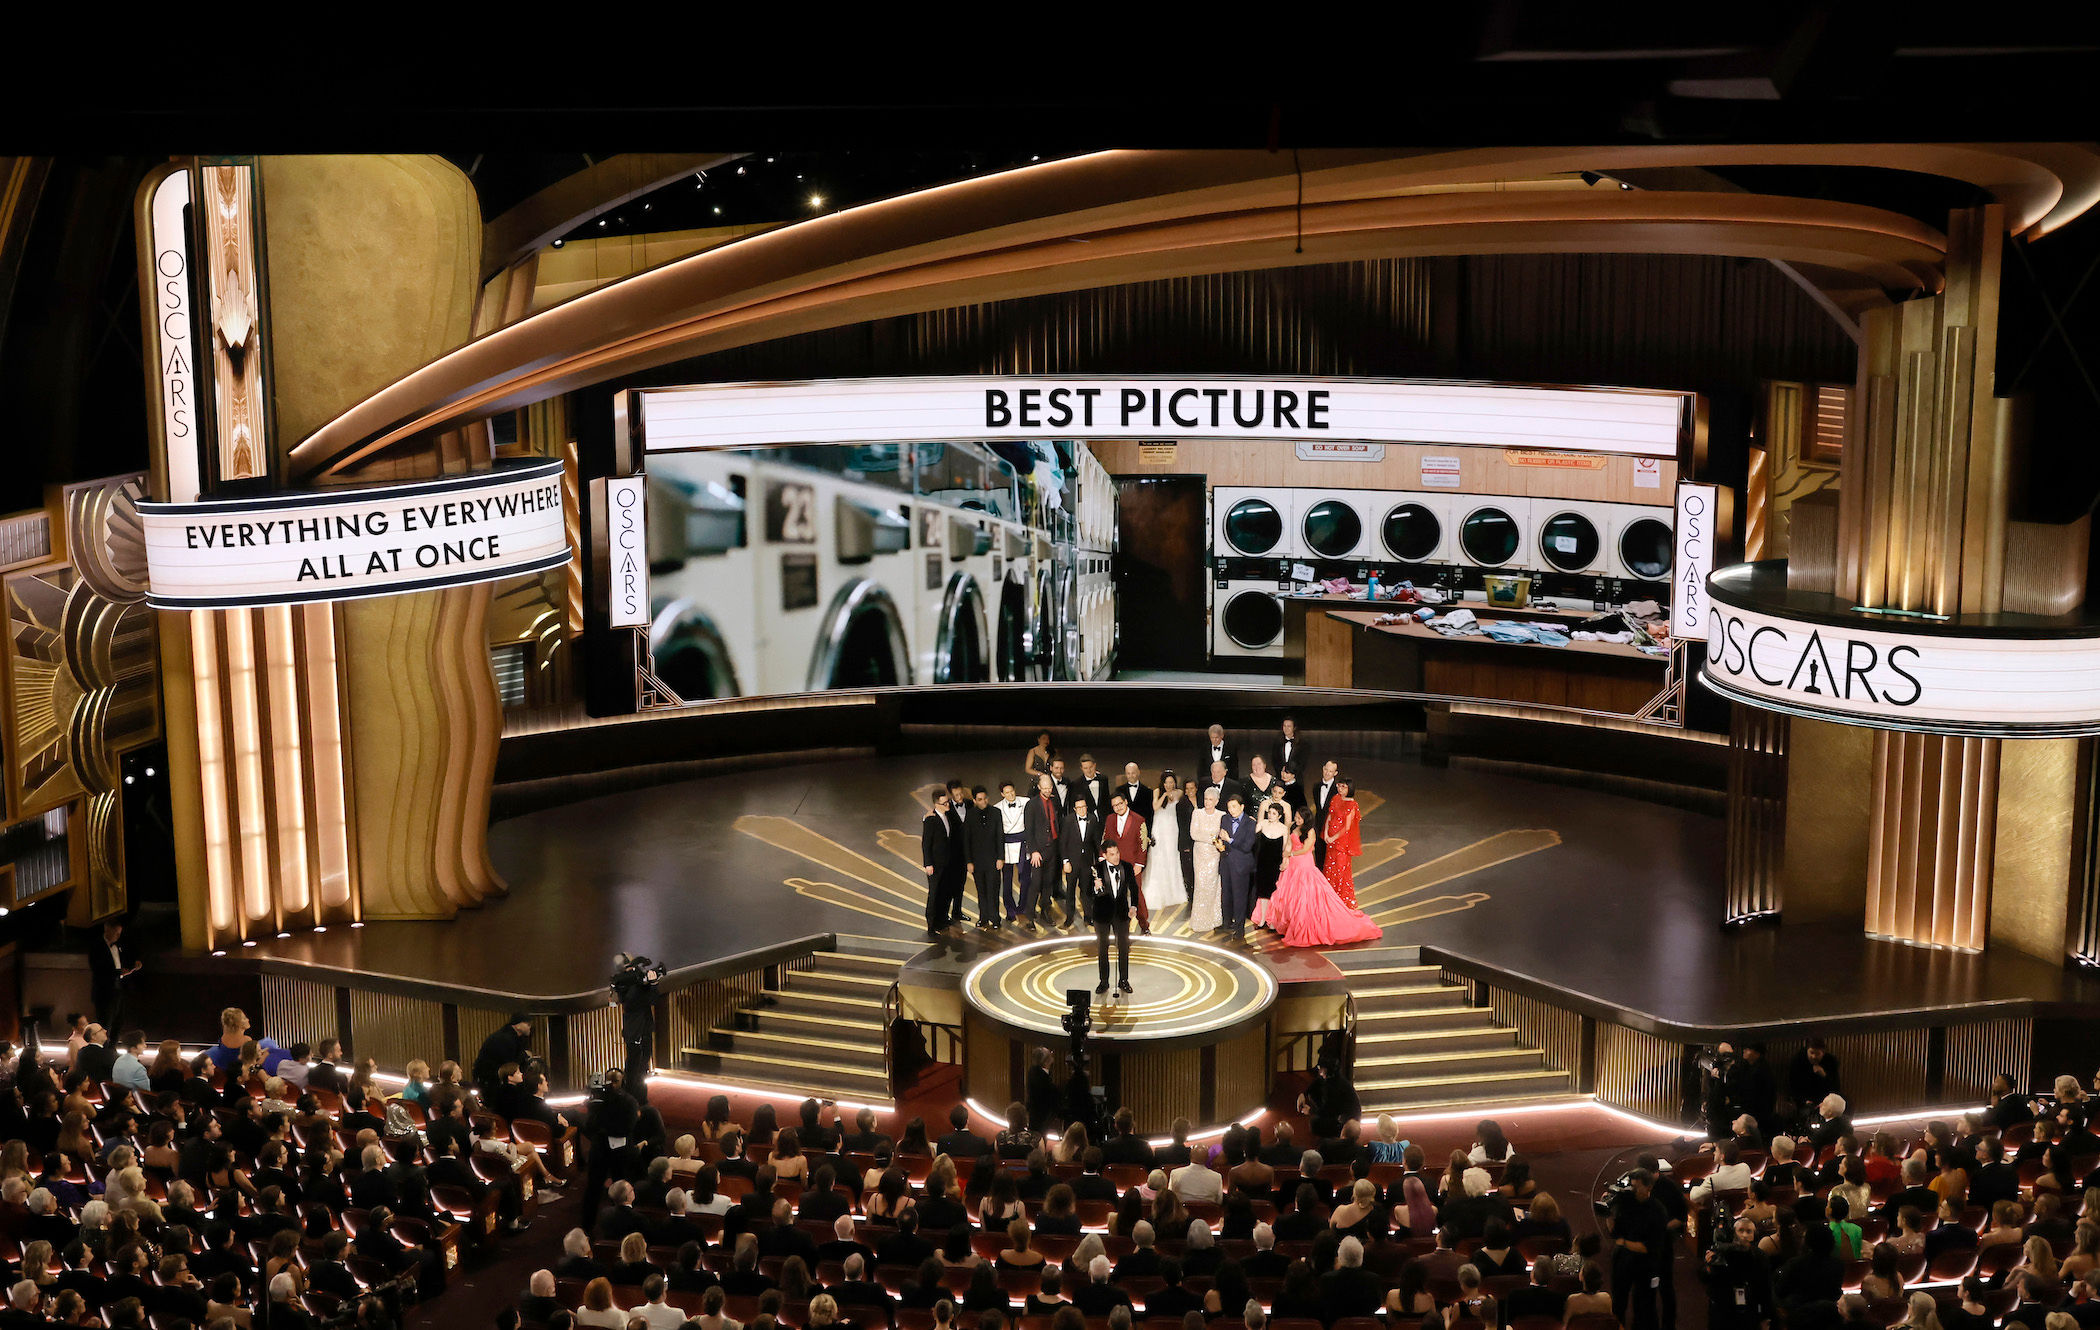 Everything' wins best picture, is everywhere at the 2023 Oscars